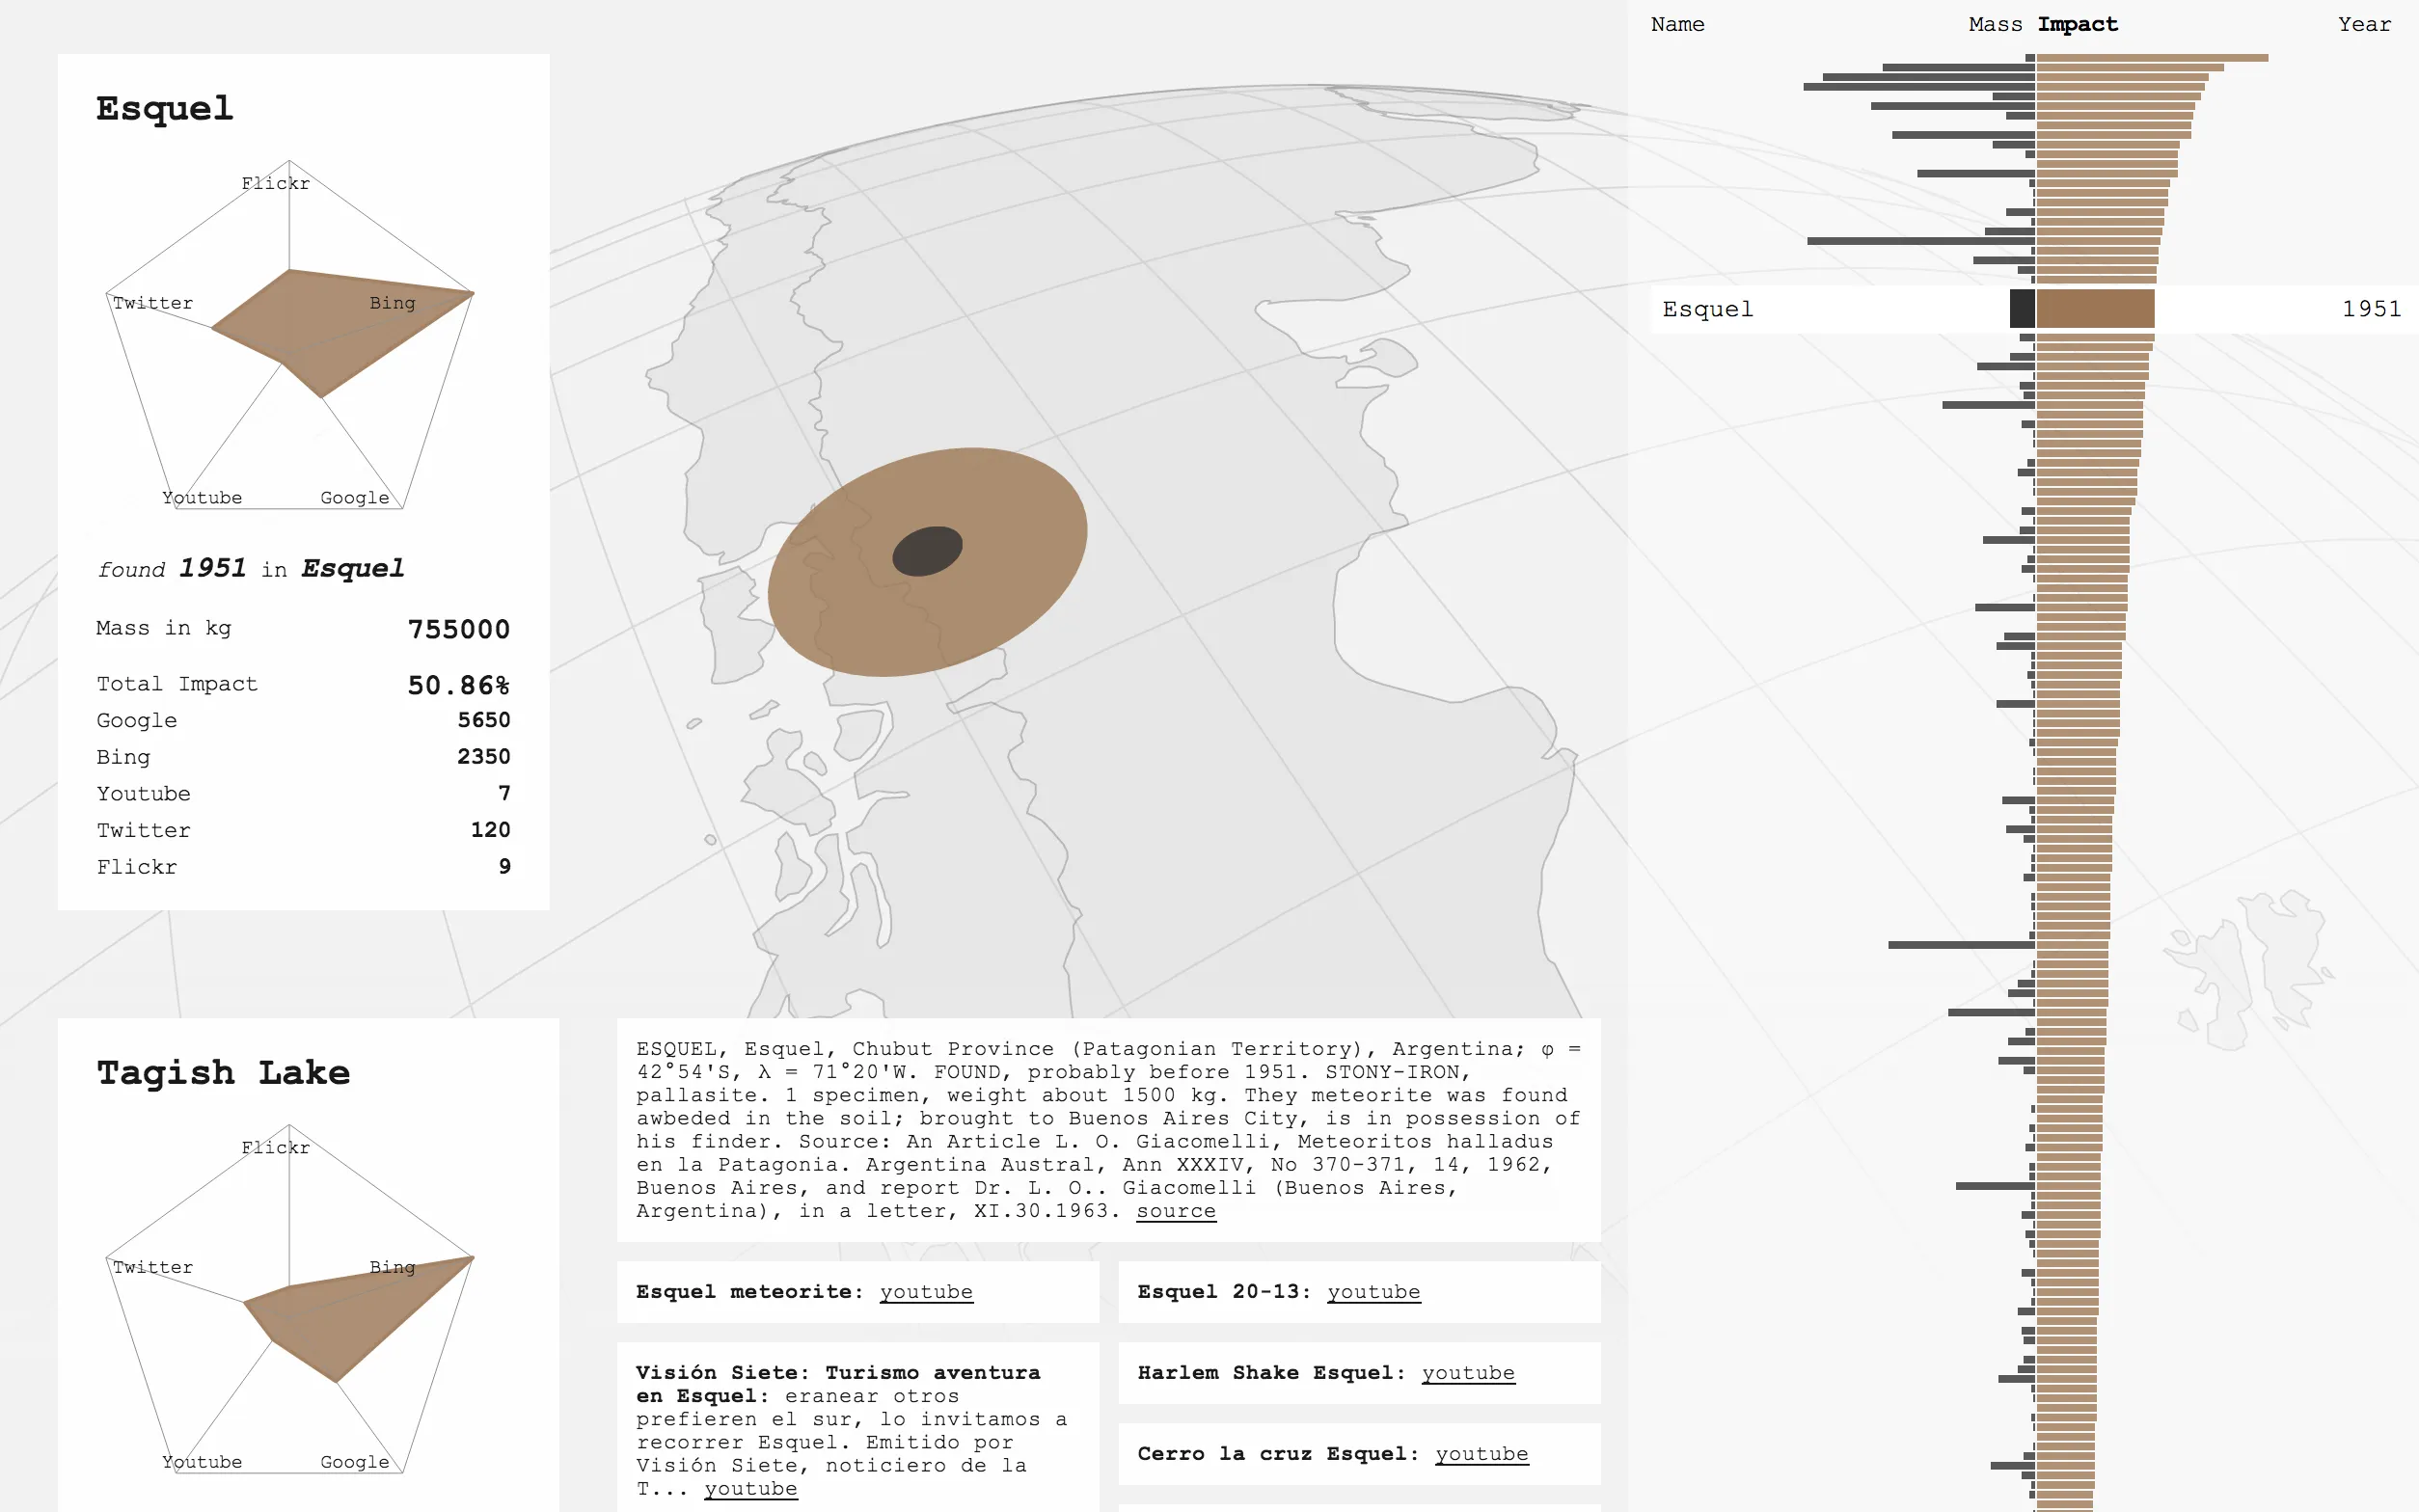 This visualization explores the media impact of meteorites on the web vs the actual mass.